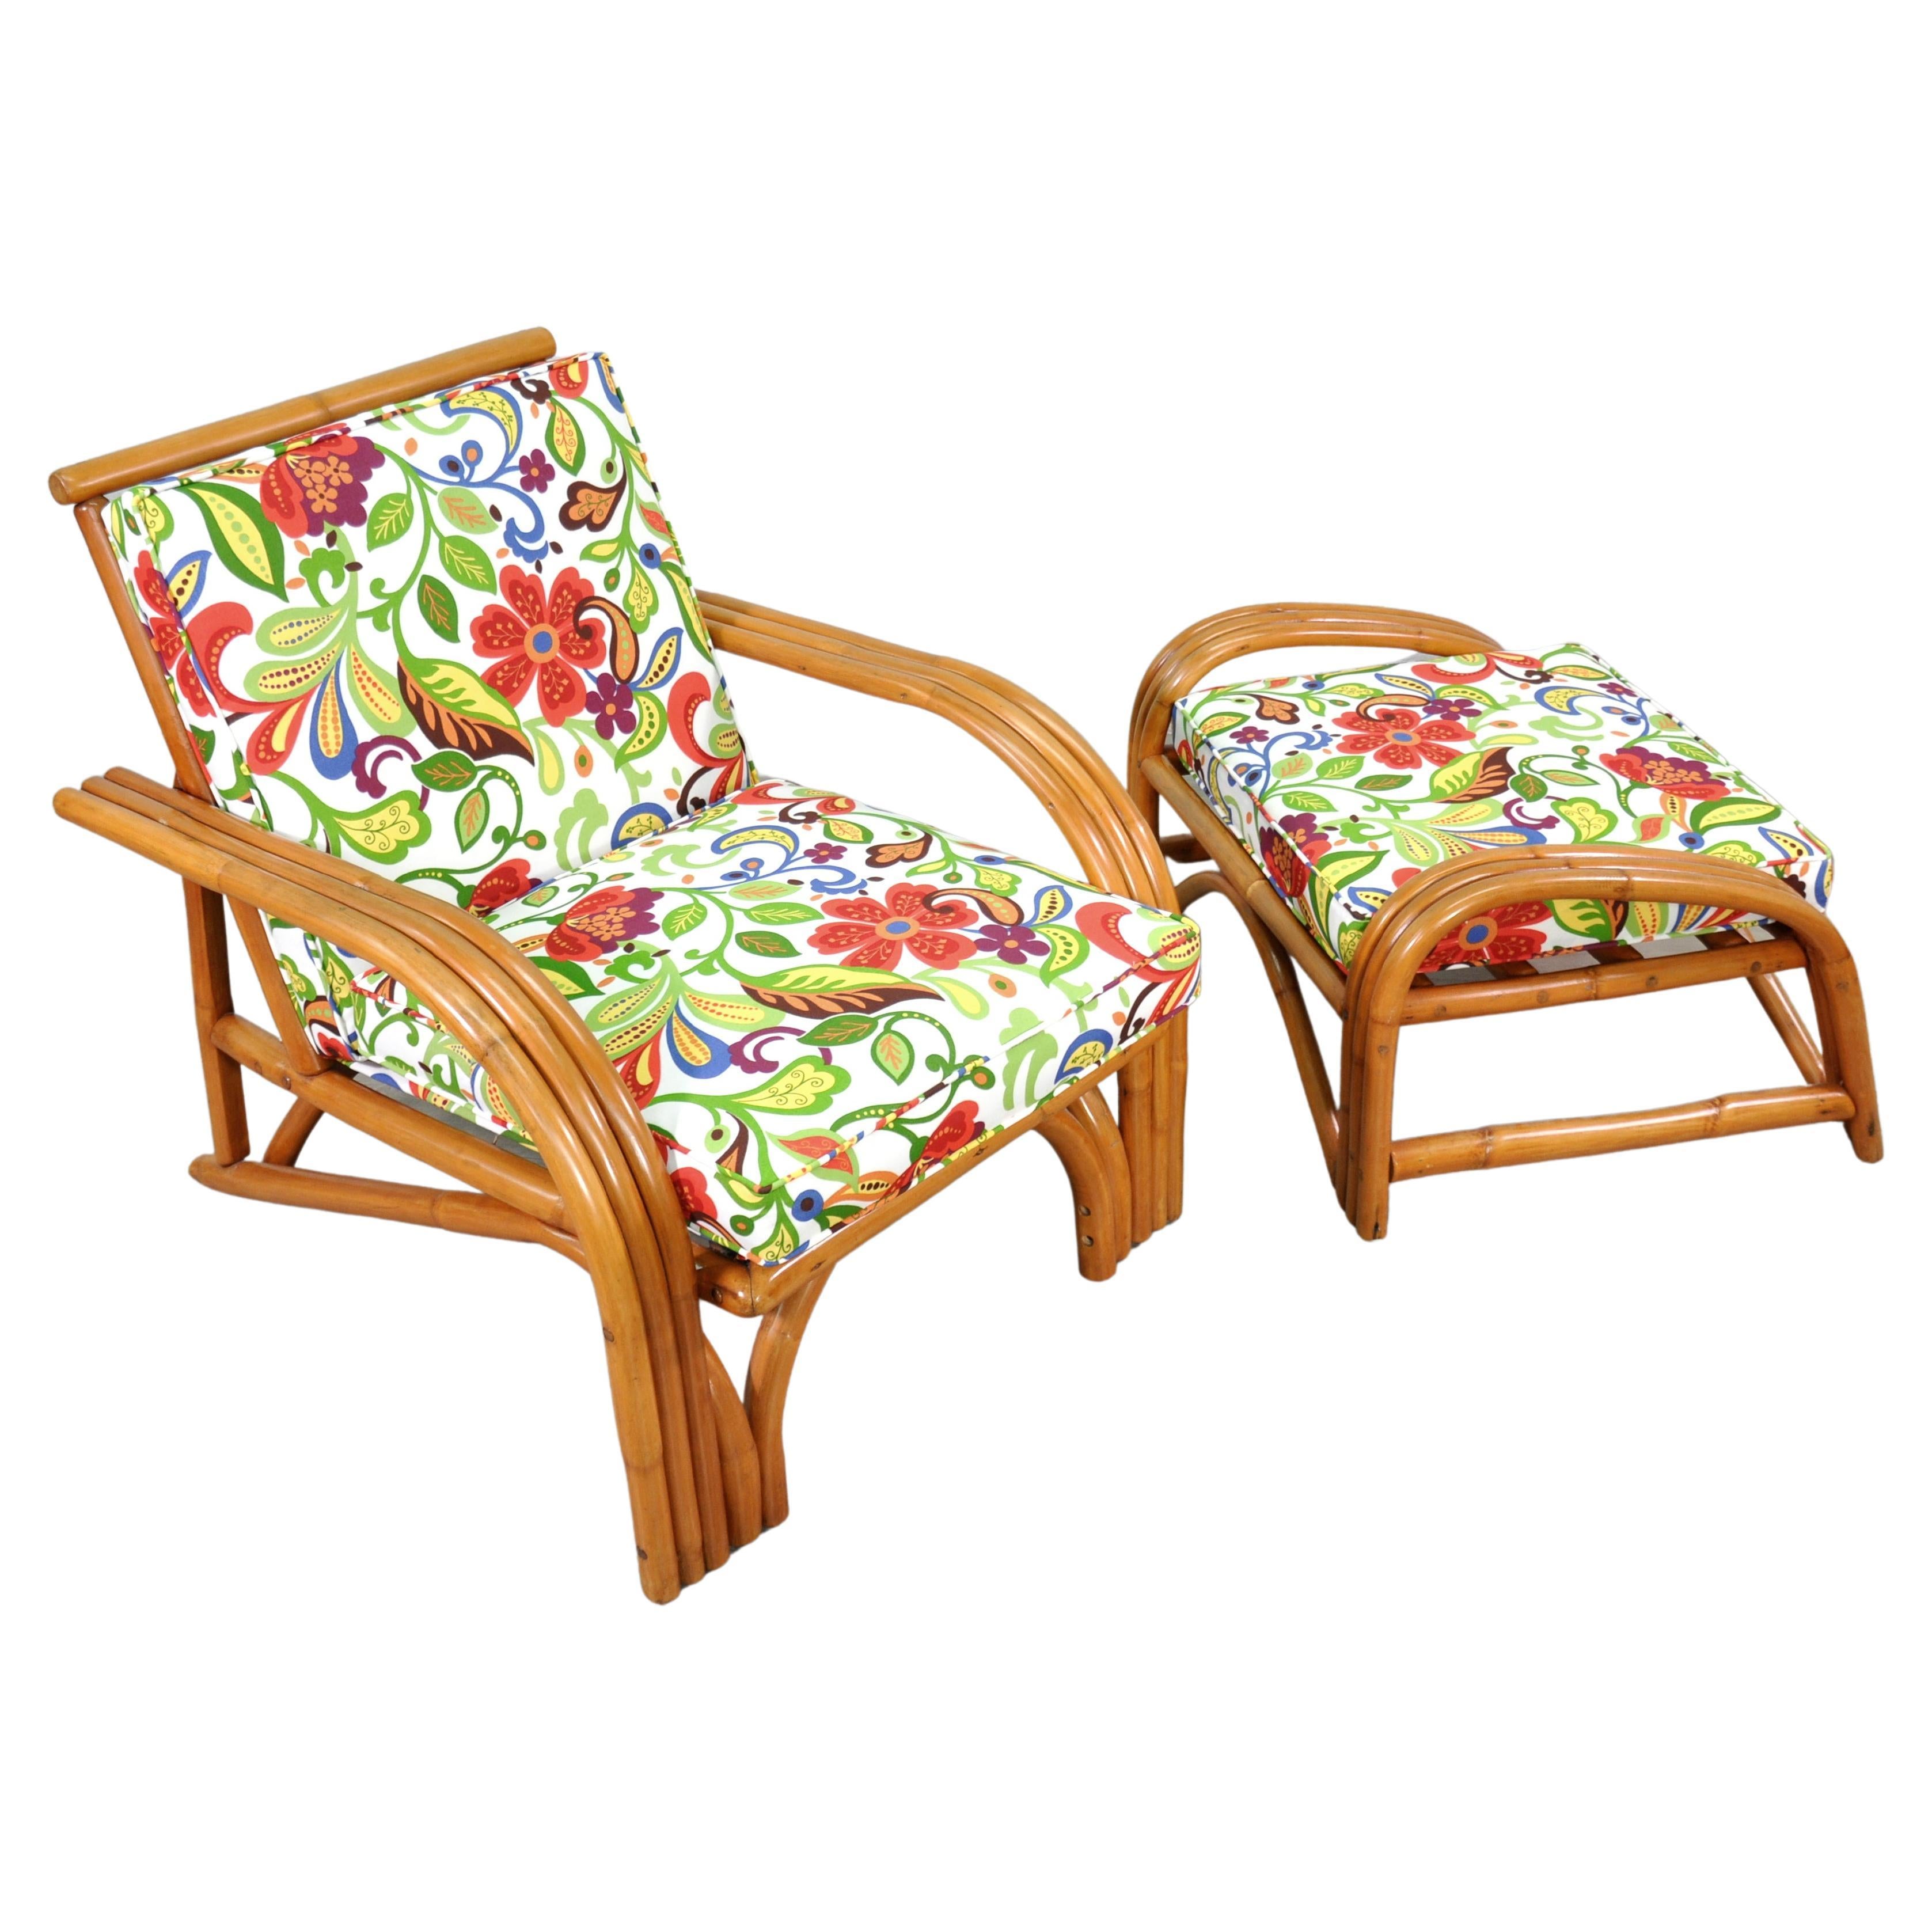 Midcentury Rattan Chair and Ottoman W/ Josef Frank Style Fabric In Excellent Condition For Sale In Miami, FL